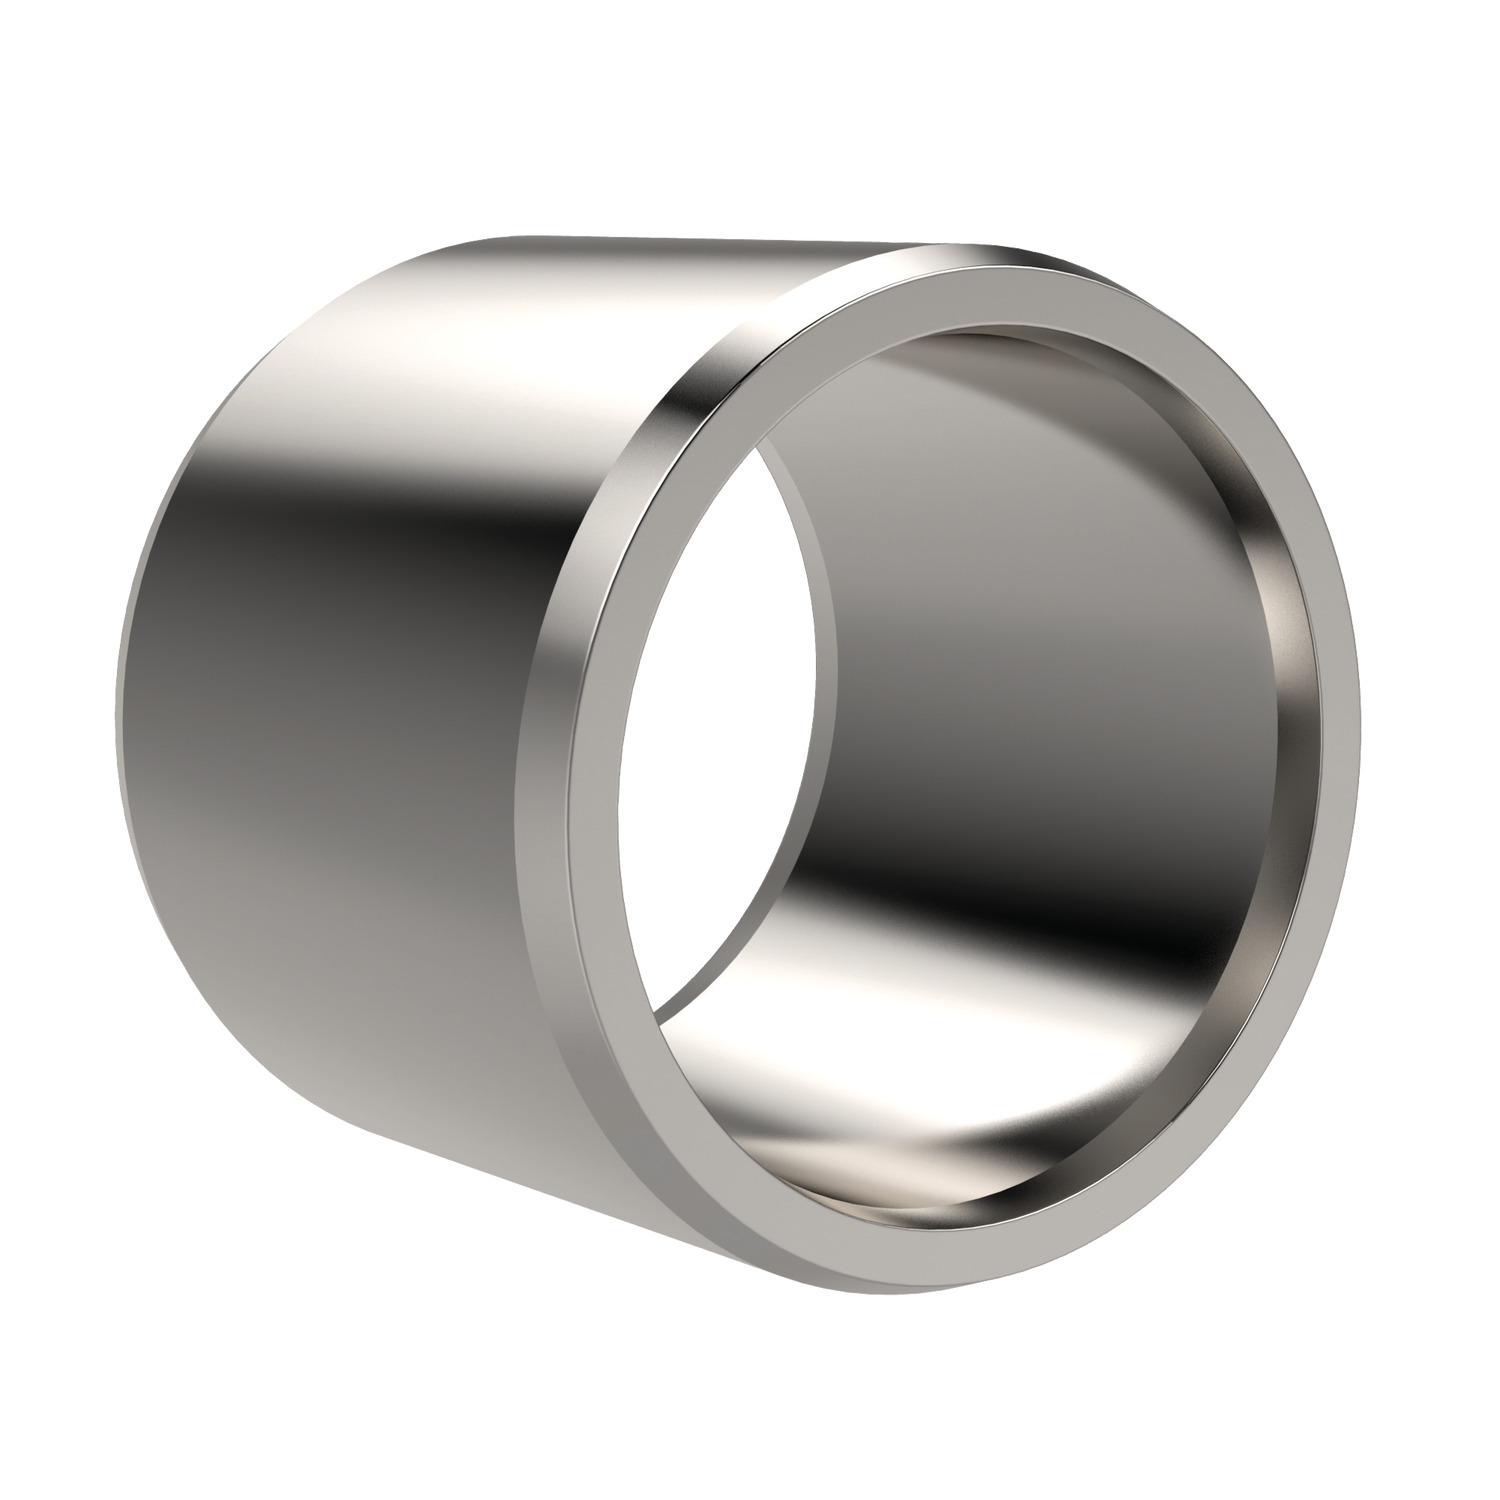 P1316 - Constant Force Bearing stainless